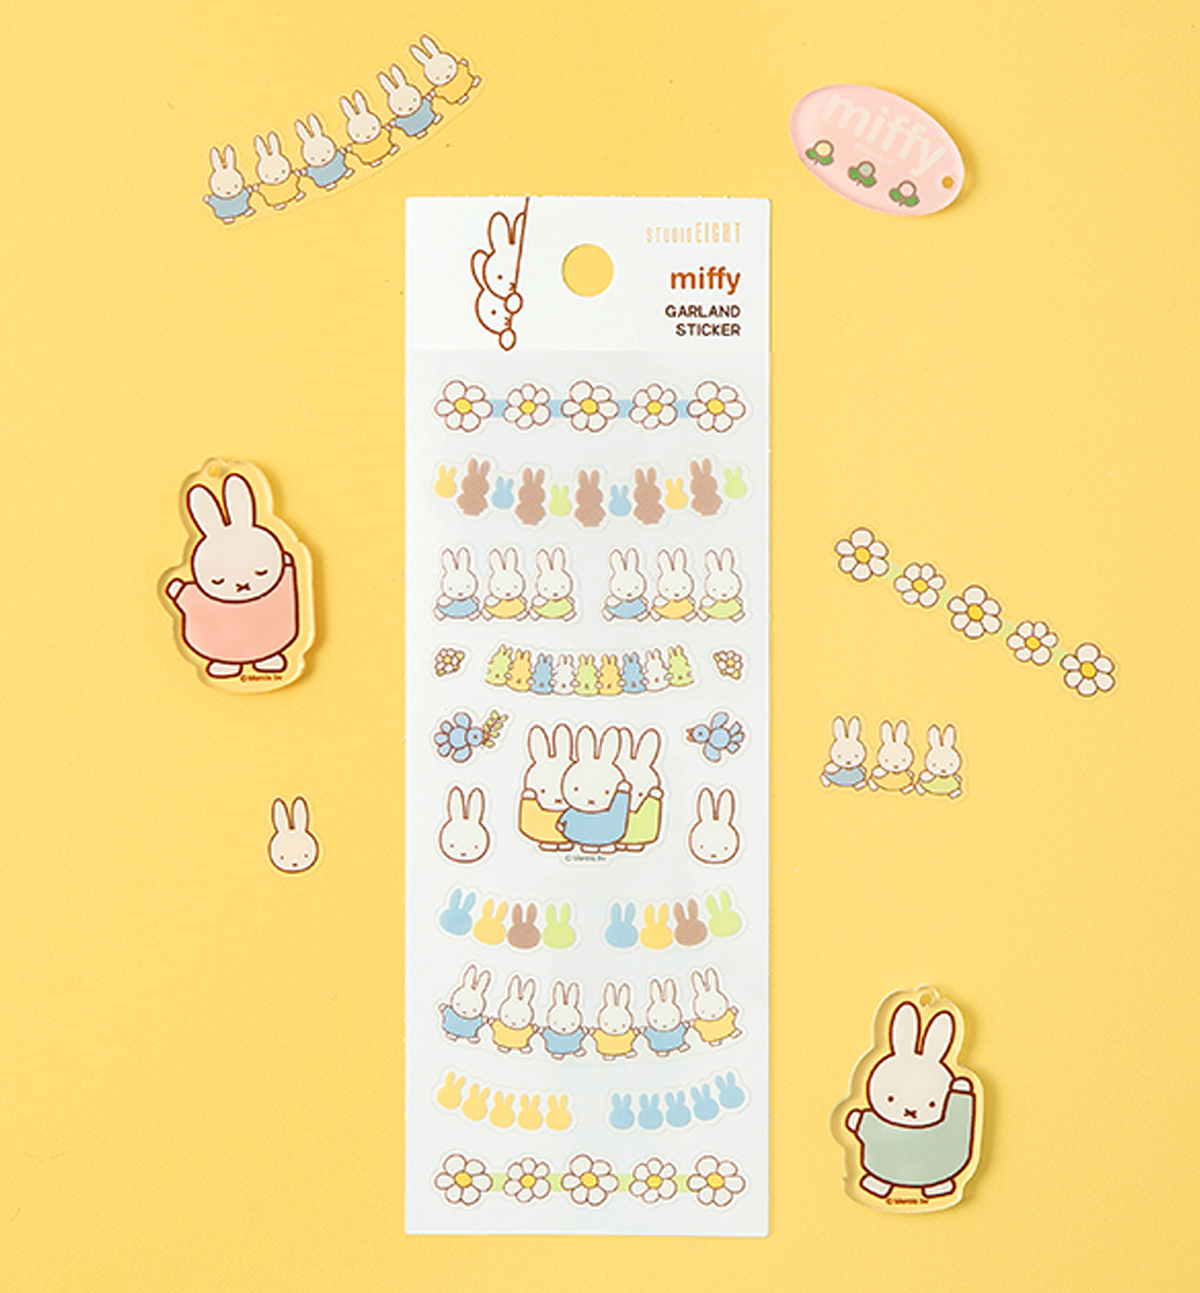 Miffy - Did you know there are Miffy stickers which you can